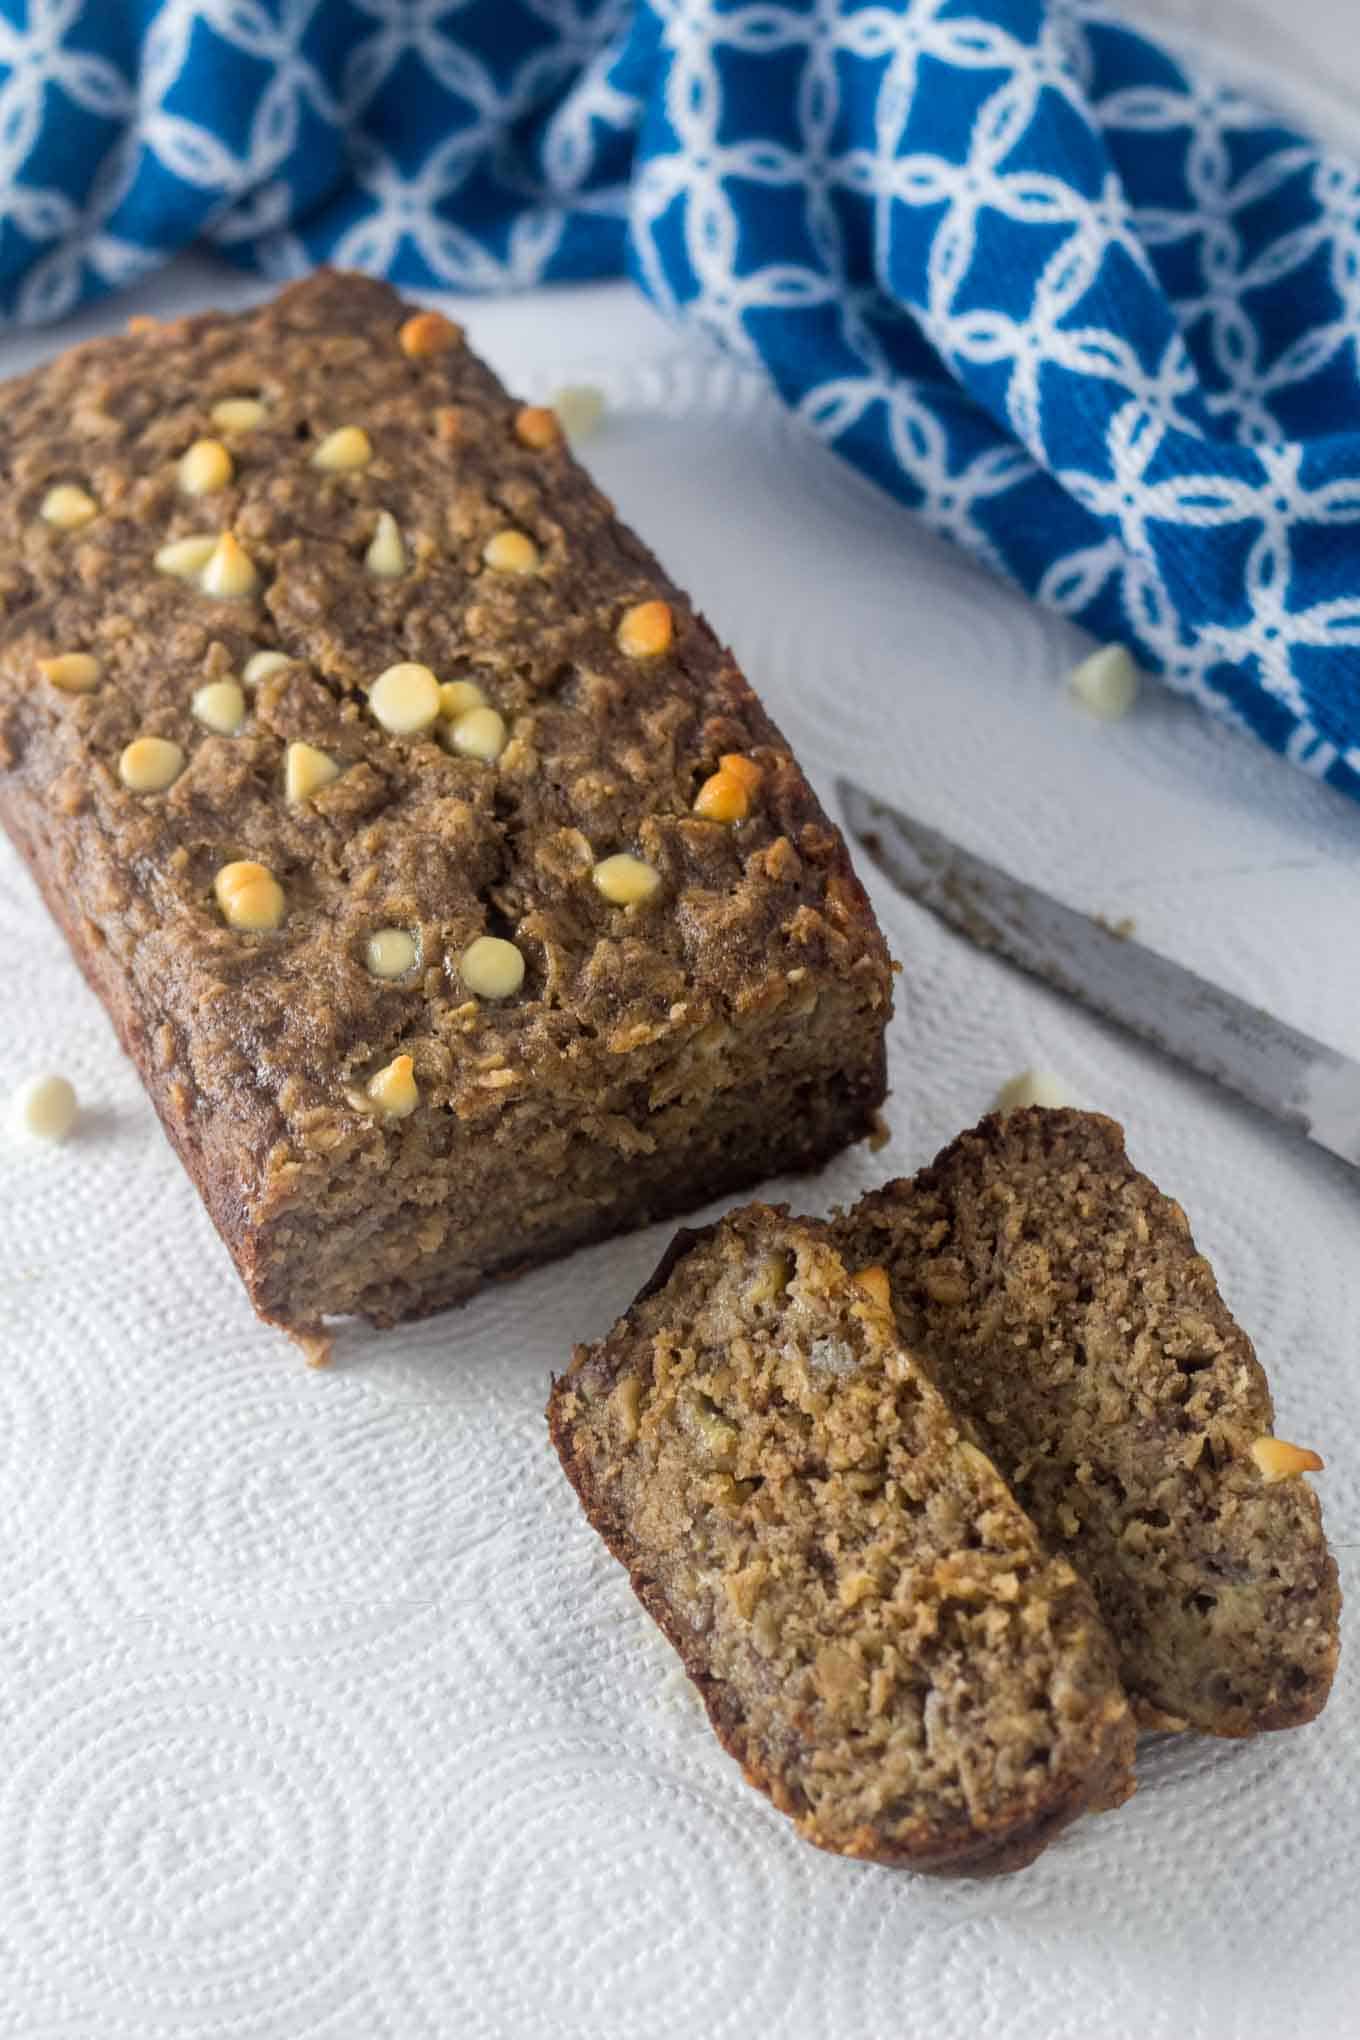 Banana Oat Bread - Try this easy 12-ingredient banana oat bread, you will love it!